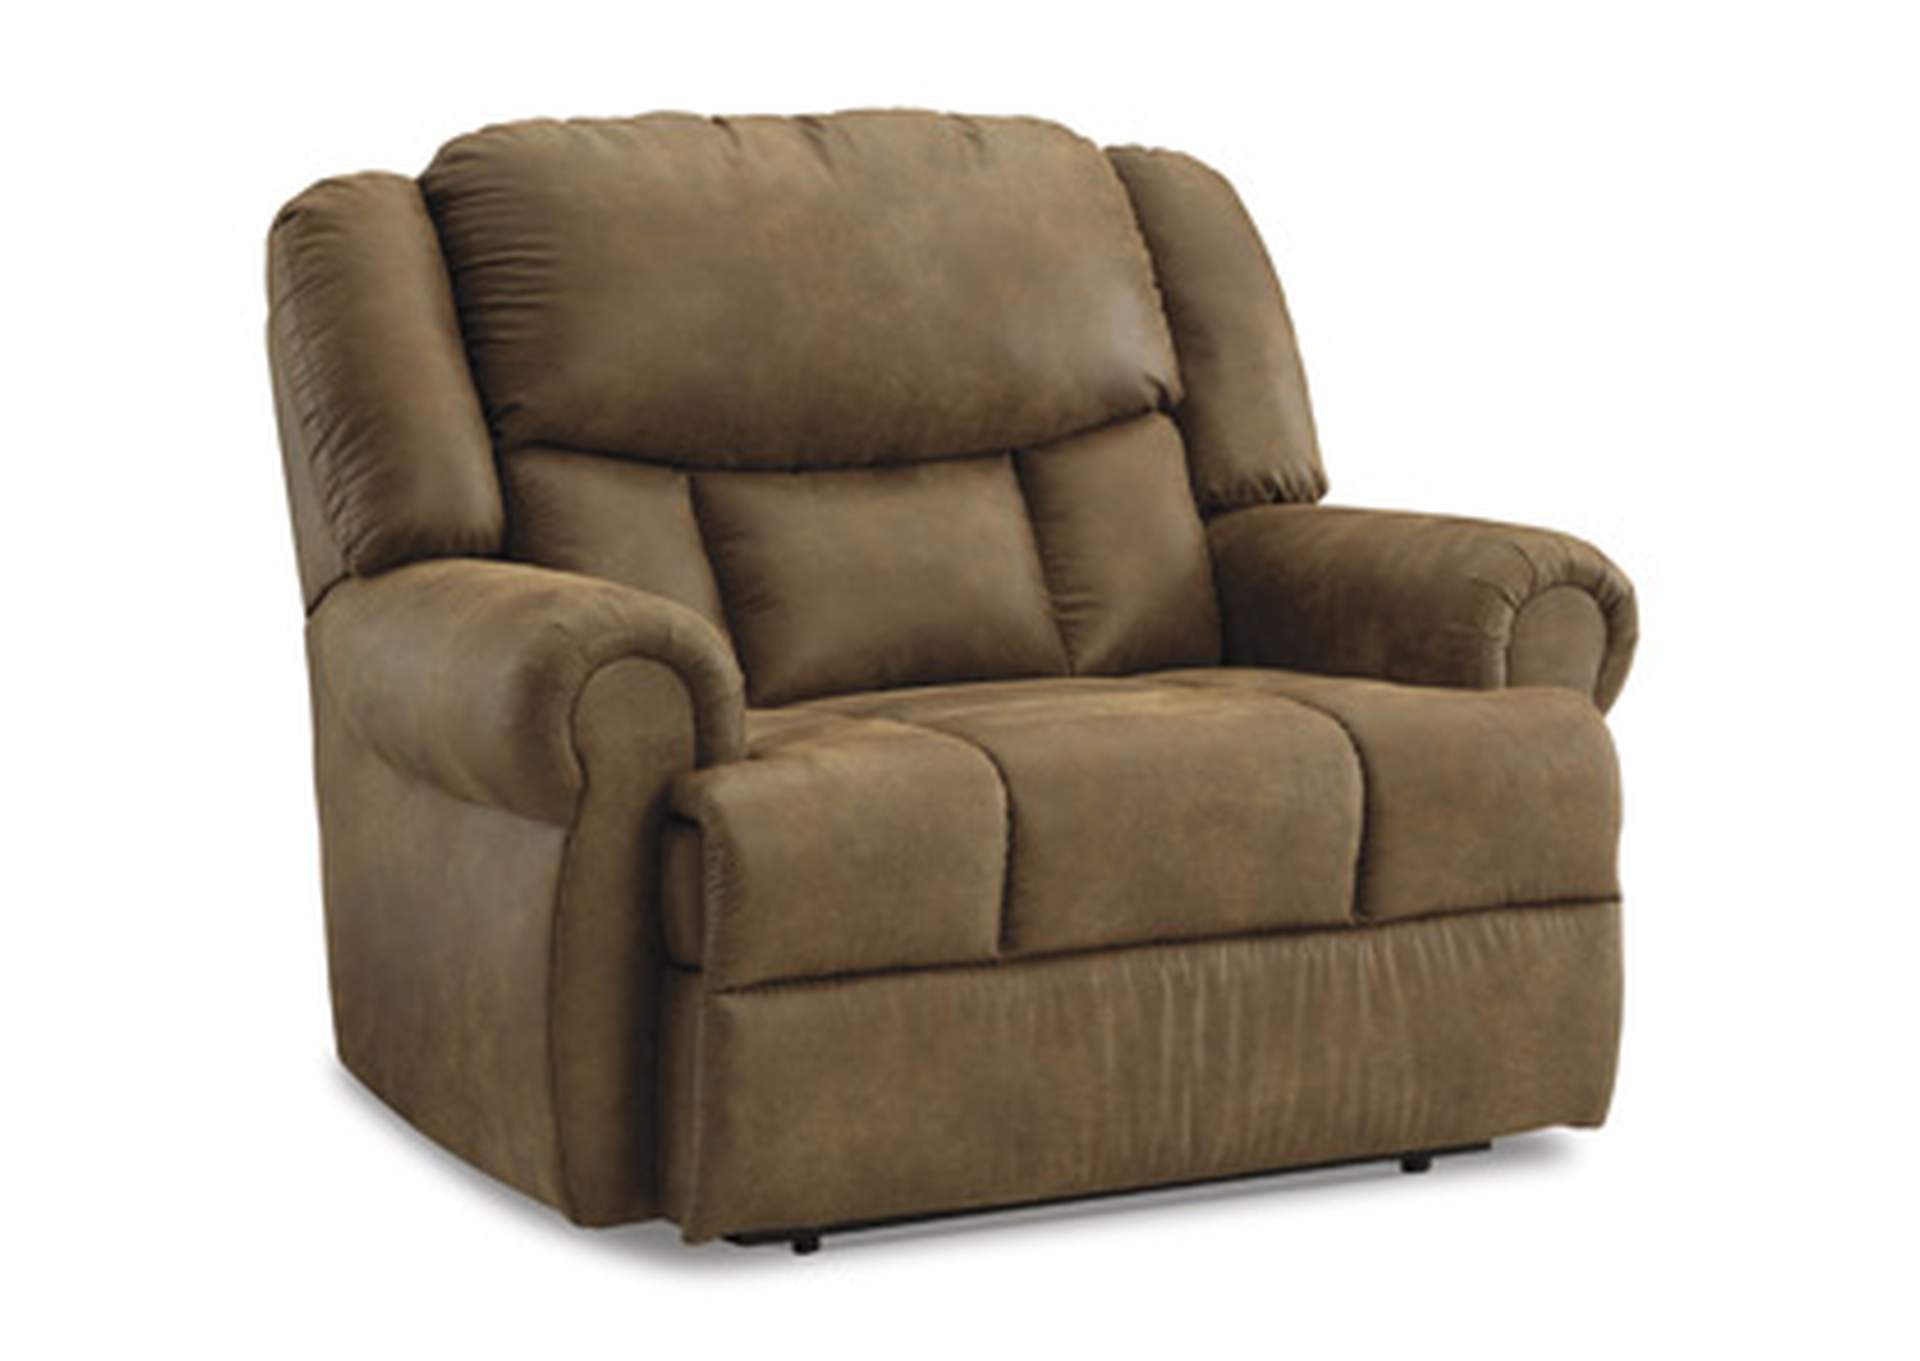 Boothbay Oversized Power Recliner,Signature Design By Ashley